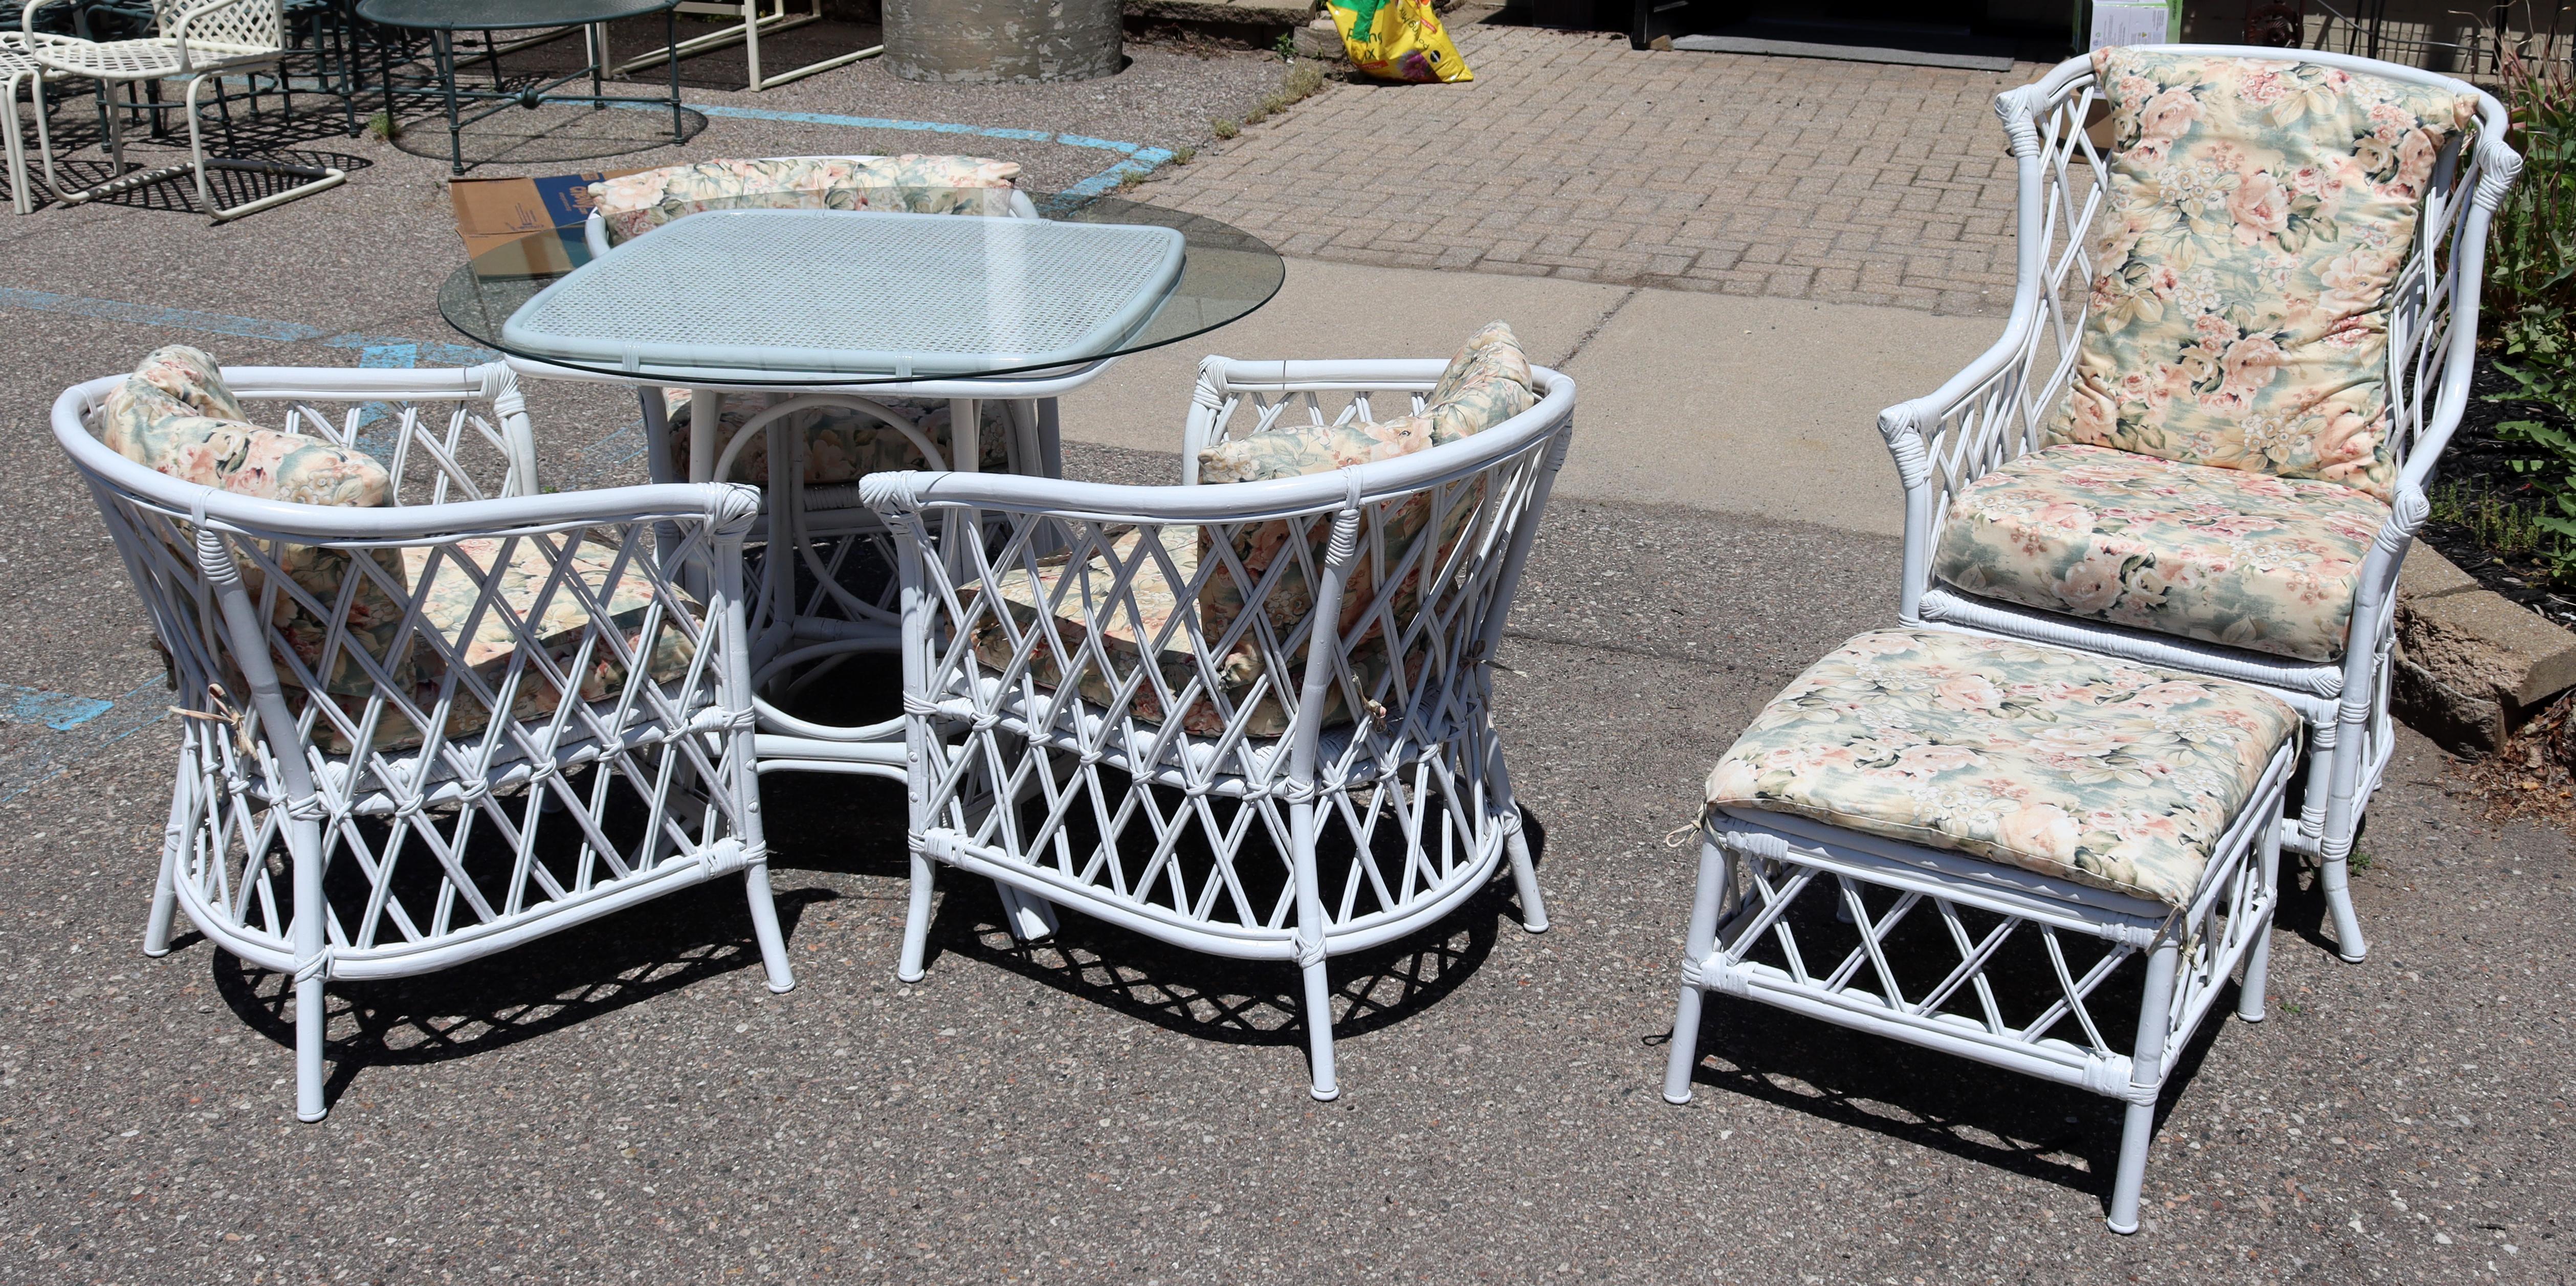 For your consideration is a gorgeous patio set, including a dining table, three dining chairs, a lounge chair, and matching ottoman, circa the 1980s-1990s. In excellent condition. The dimensions of the dining chairs are 26.5